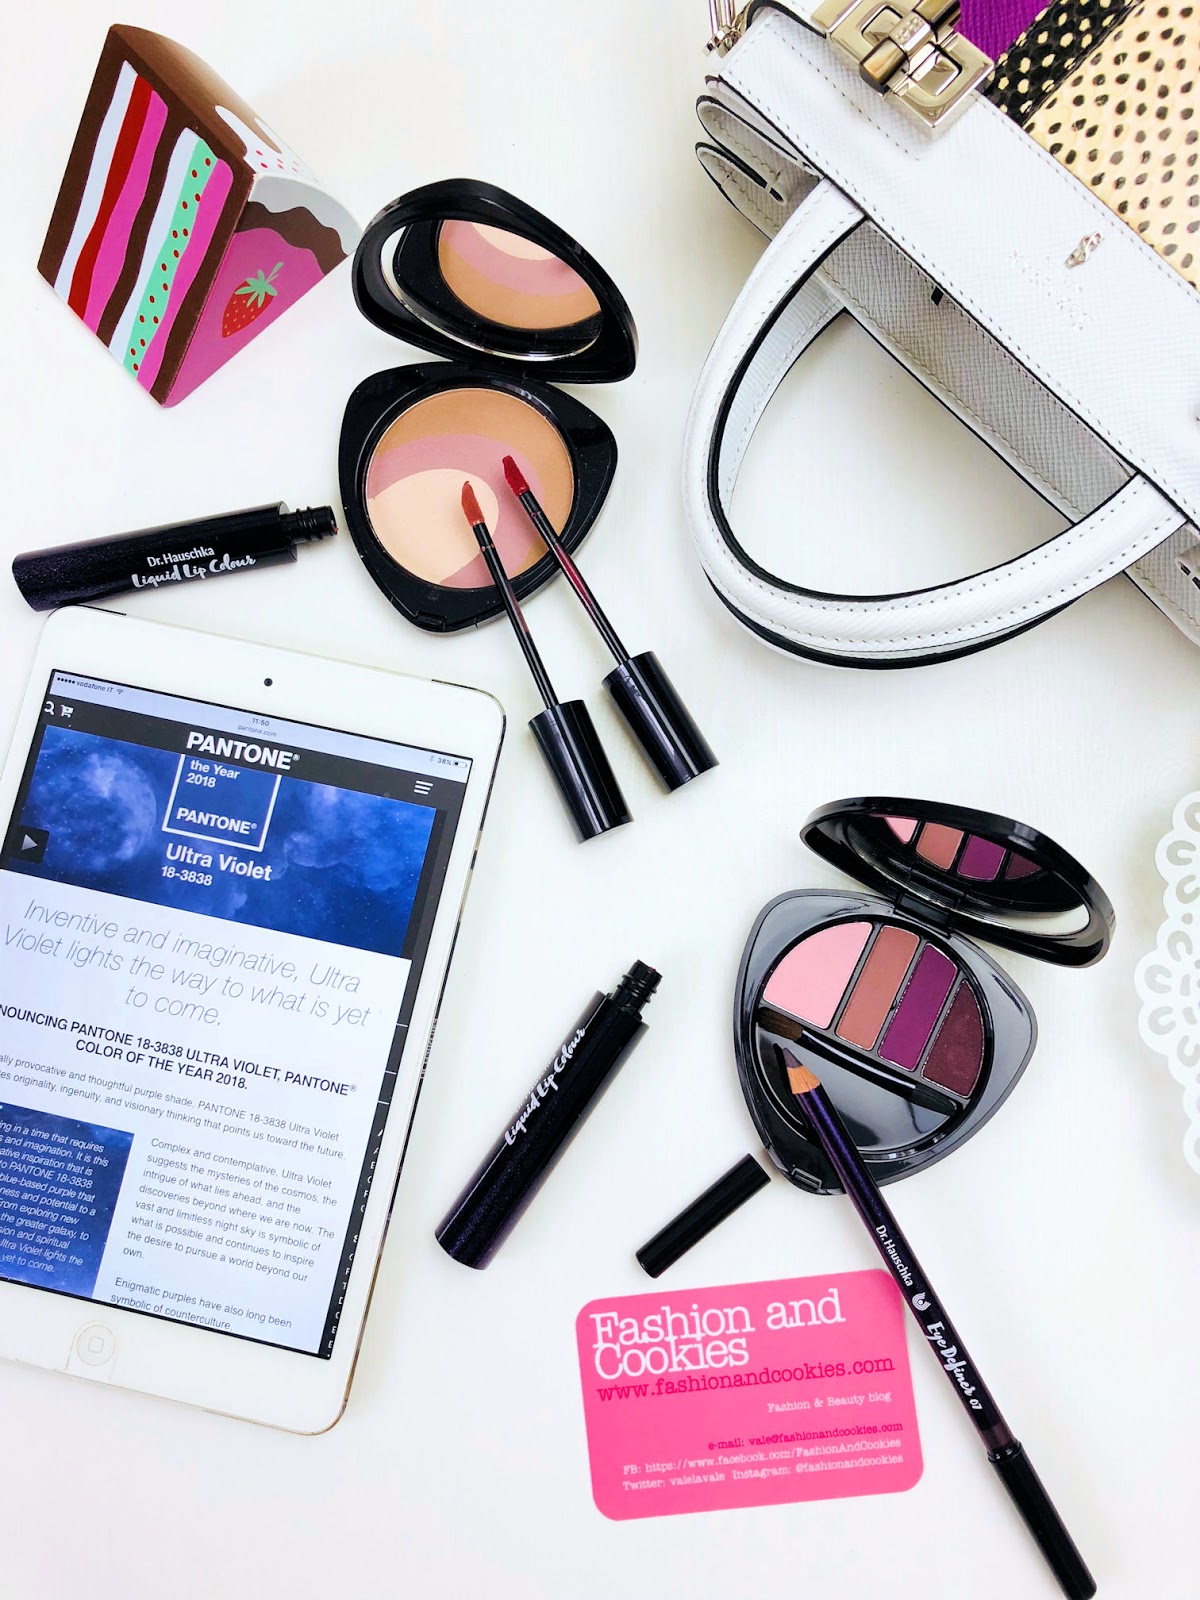 Dr. Hauschka Purple Light limited edition makeup collection on Fashion and Cookies beauty blog, beauty blogger